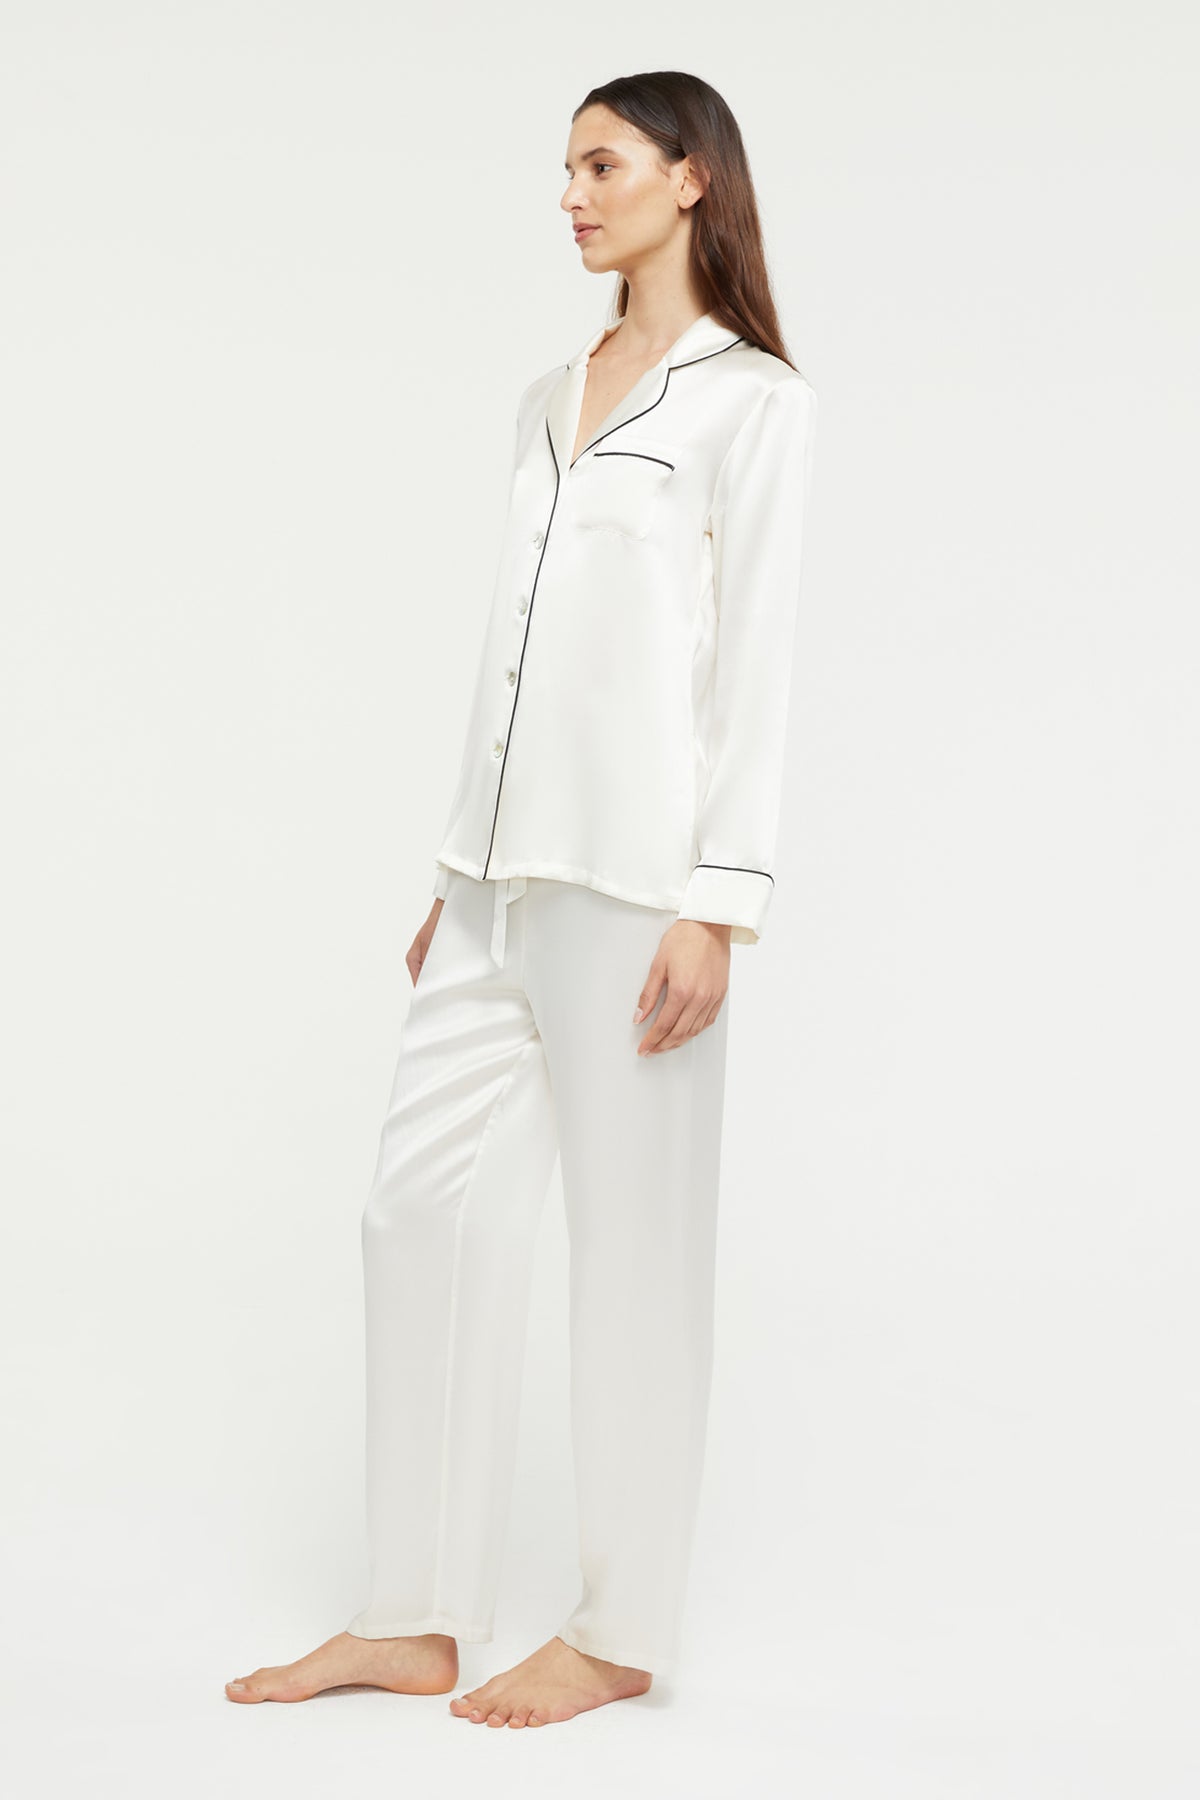 The Fine Finishes Pyjama in Creme is a Ginia Sleepwear signature piece and part of our Silk Basics collection.